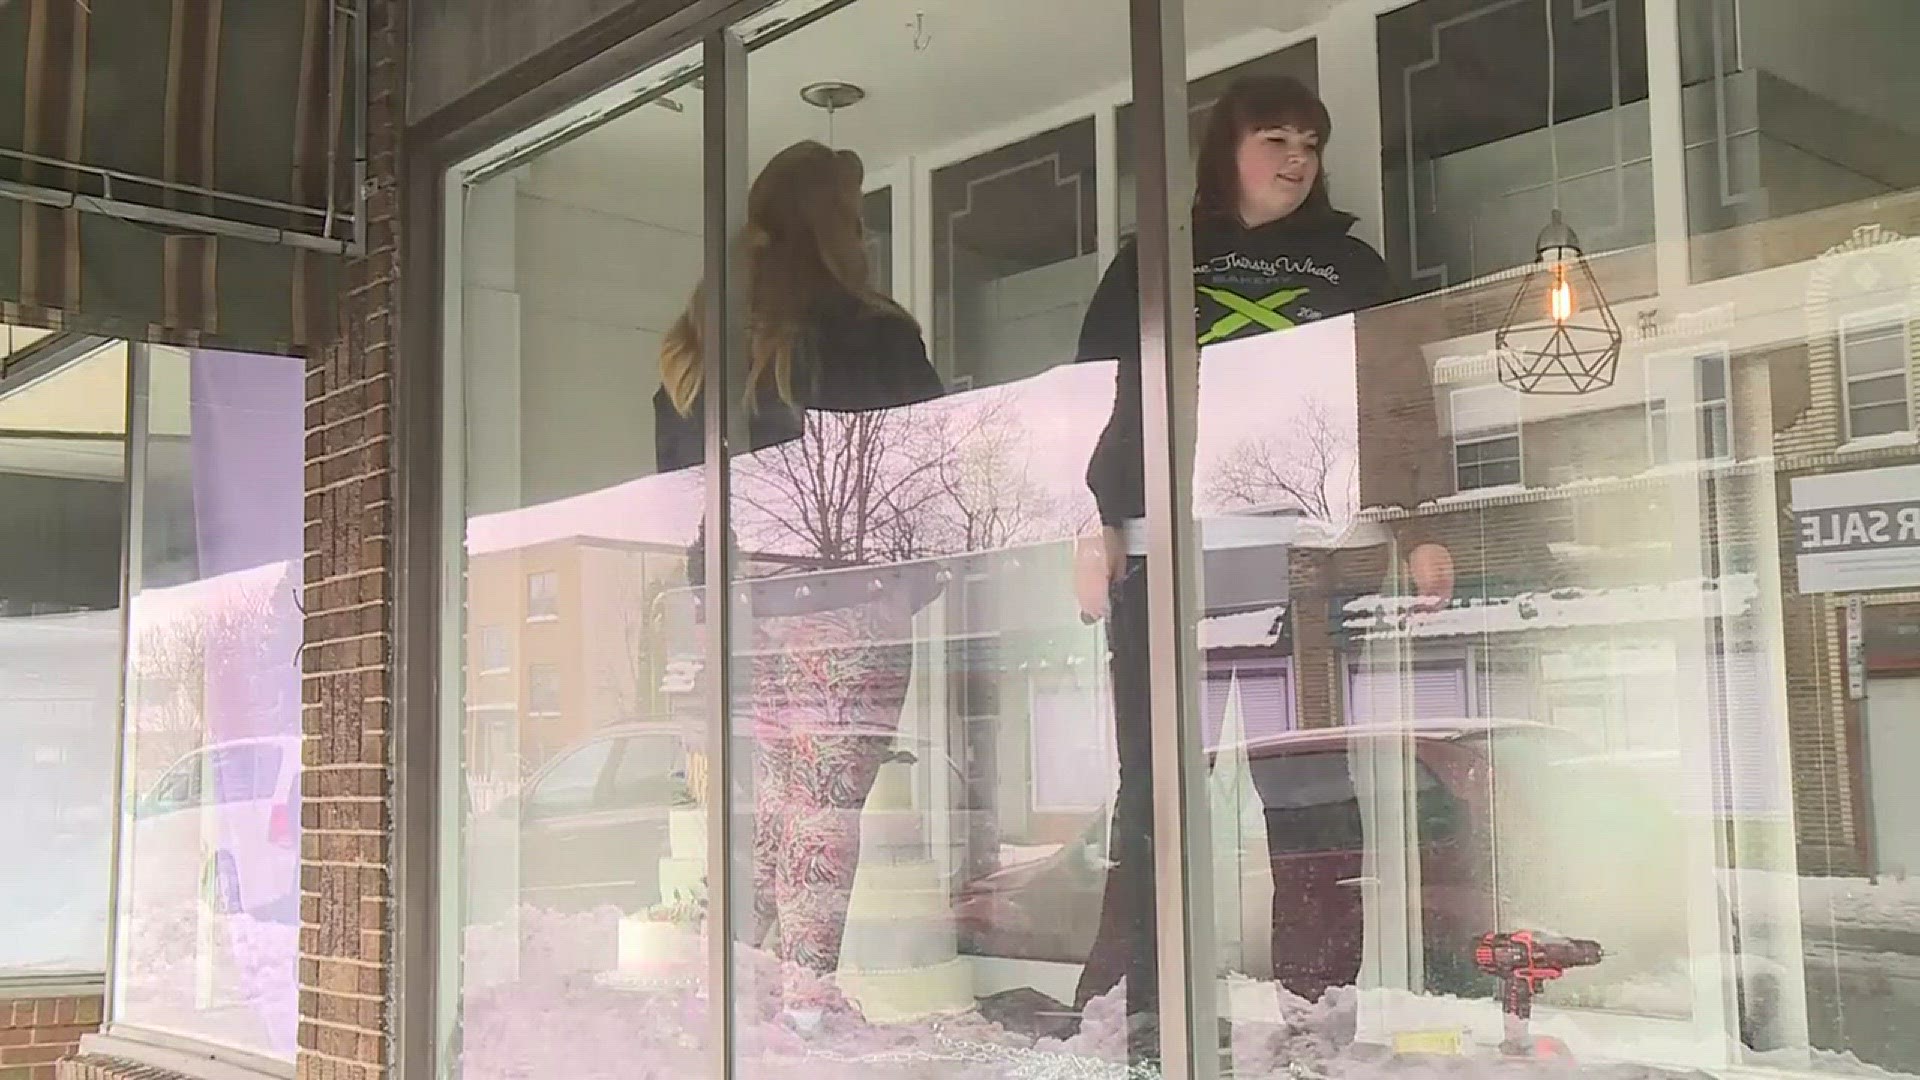 A bakery in North Minneapolis is scheduled to open its doors this week. But a string of hurdles, including an early morning break-in almost jeopardized that.